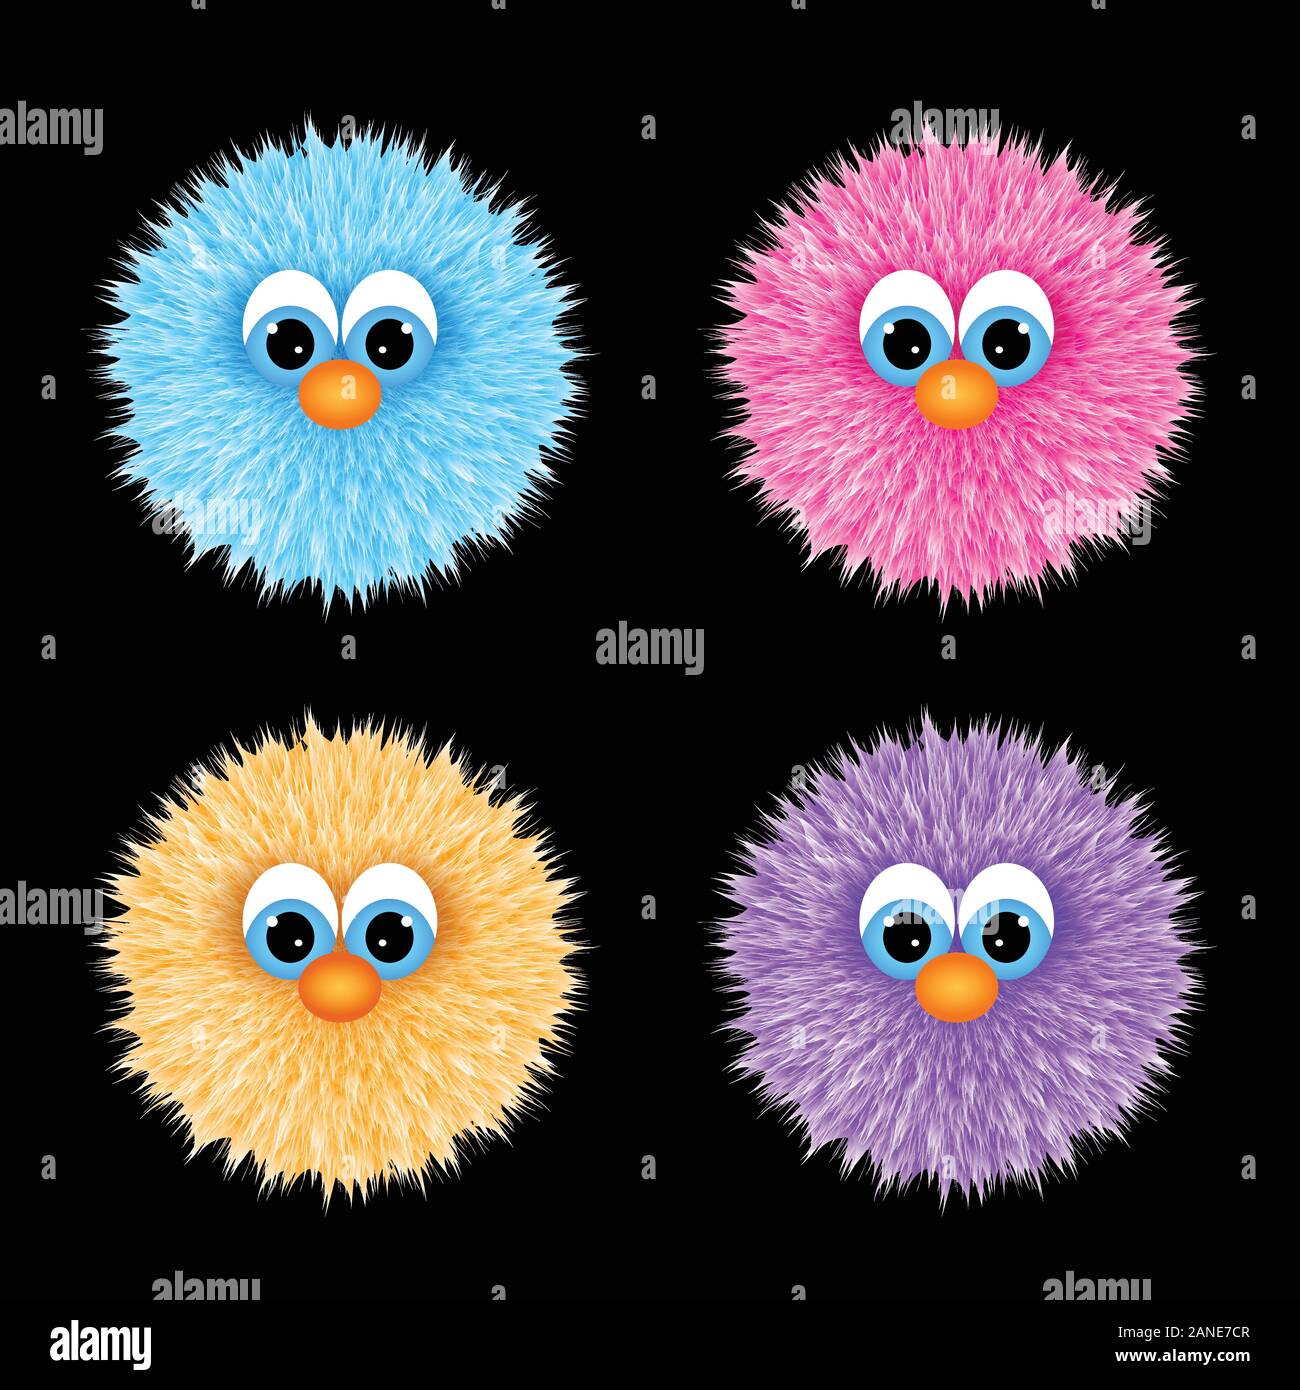 Funny cartoon character set in four colors. Cute fluffy design elements on black isolated background. Stock Vector